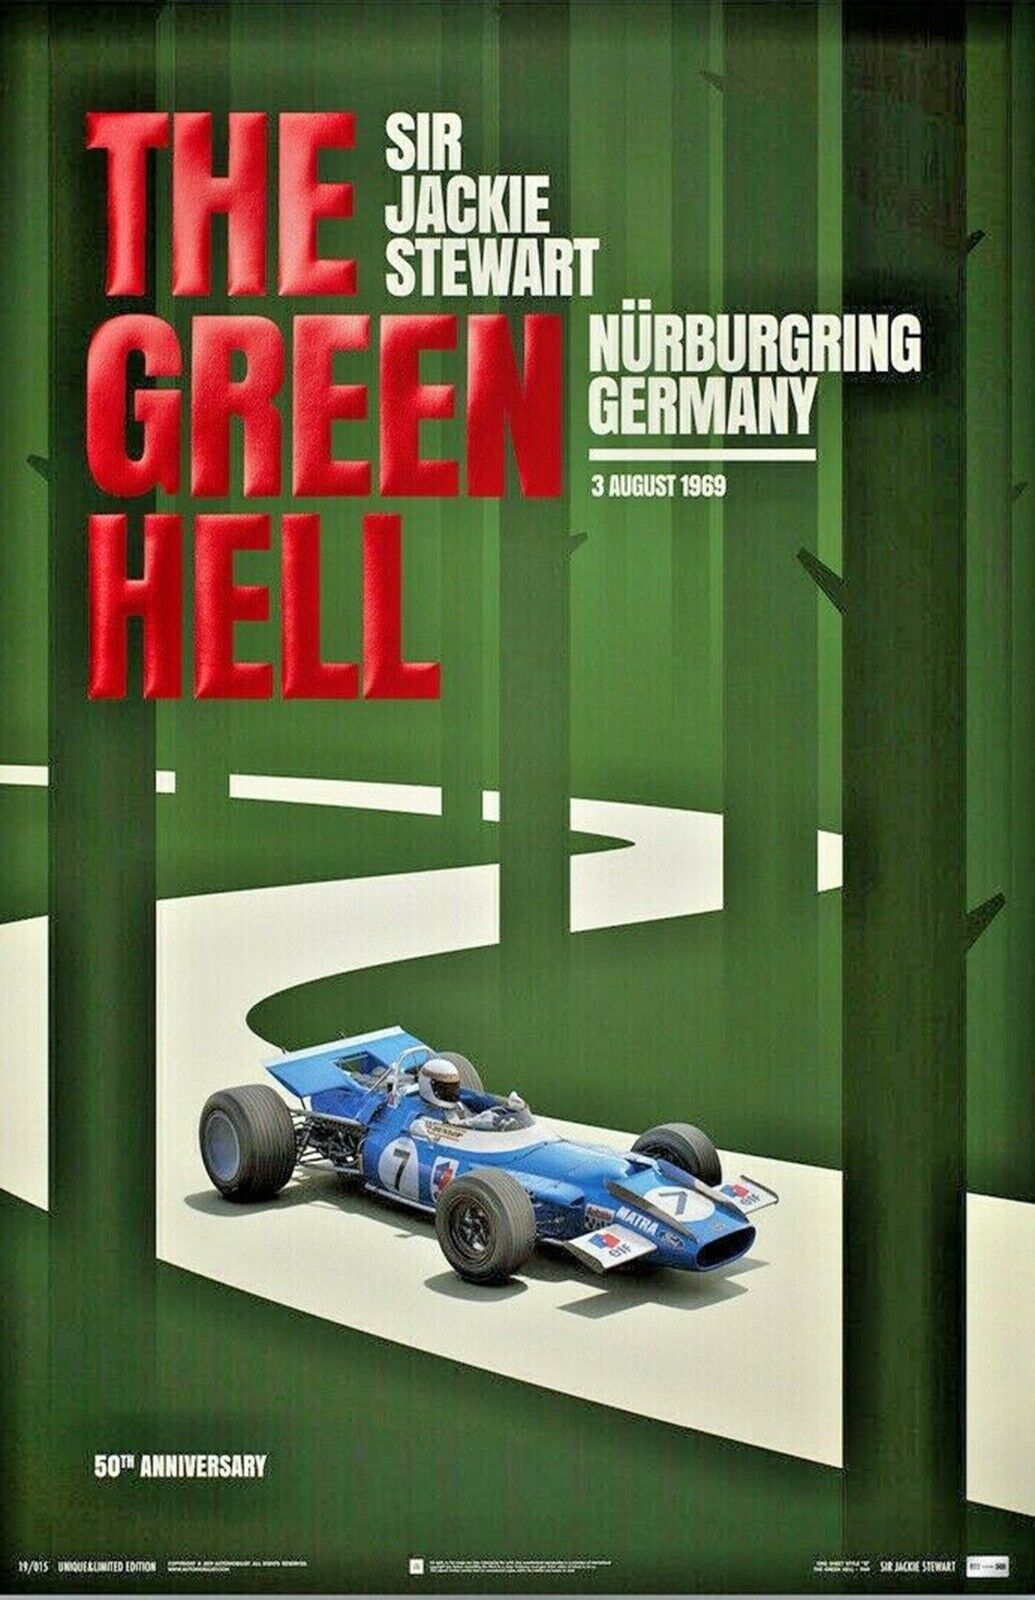 THE AWESOME GREEN HELL RACING POSTER JACKIE STEWART